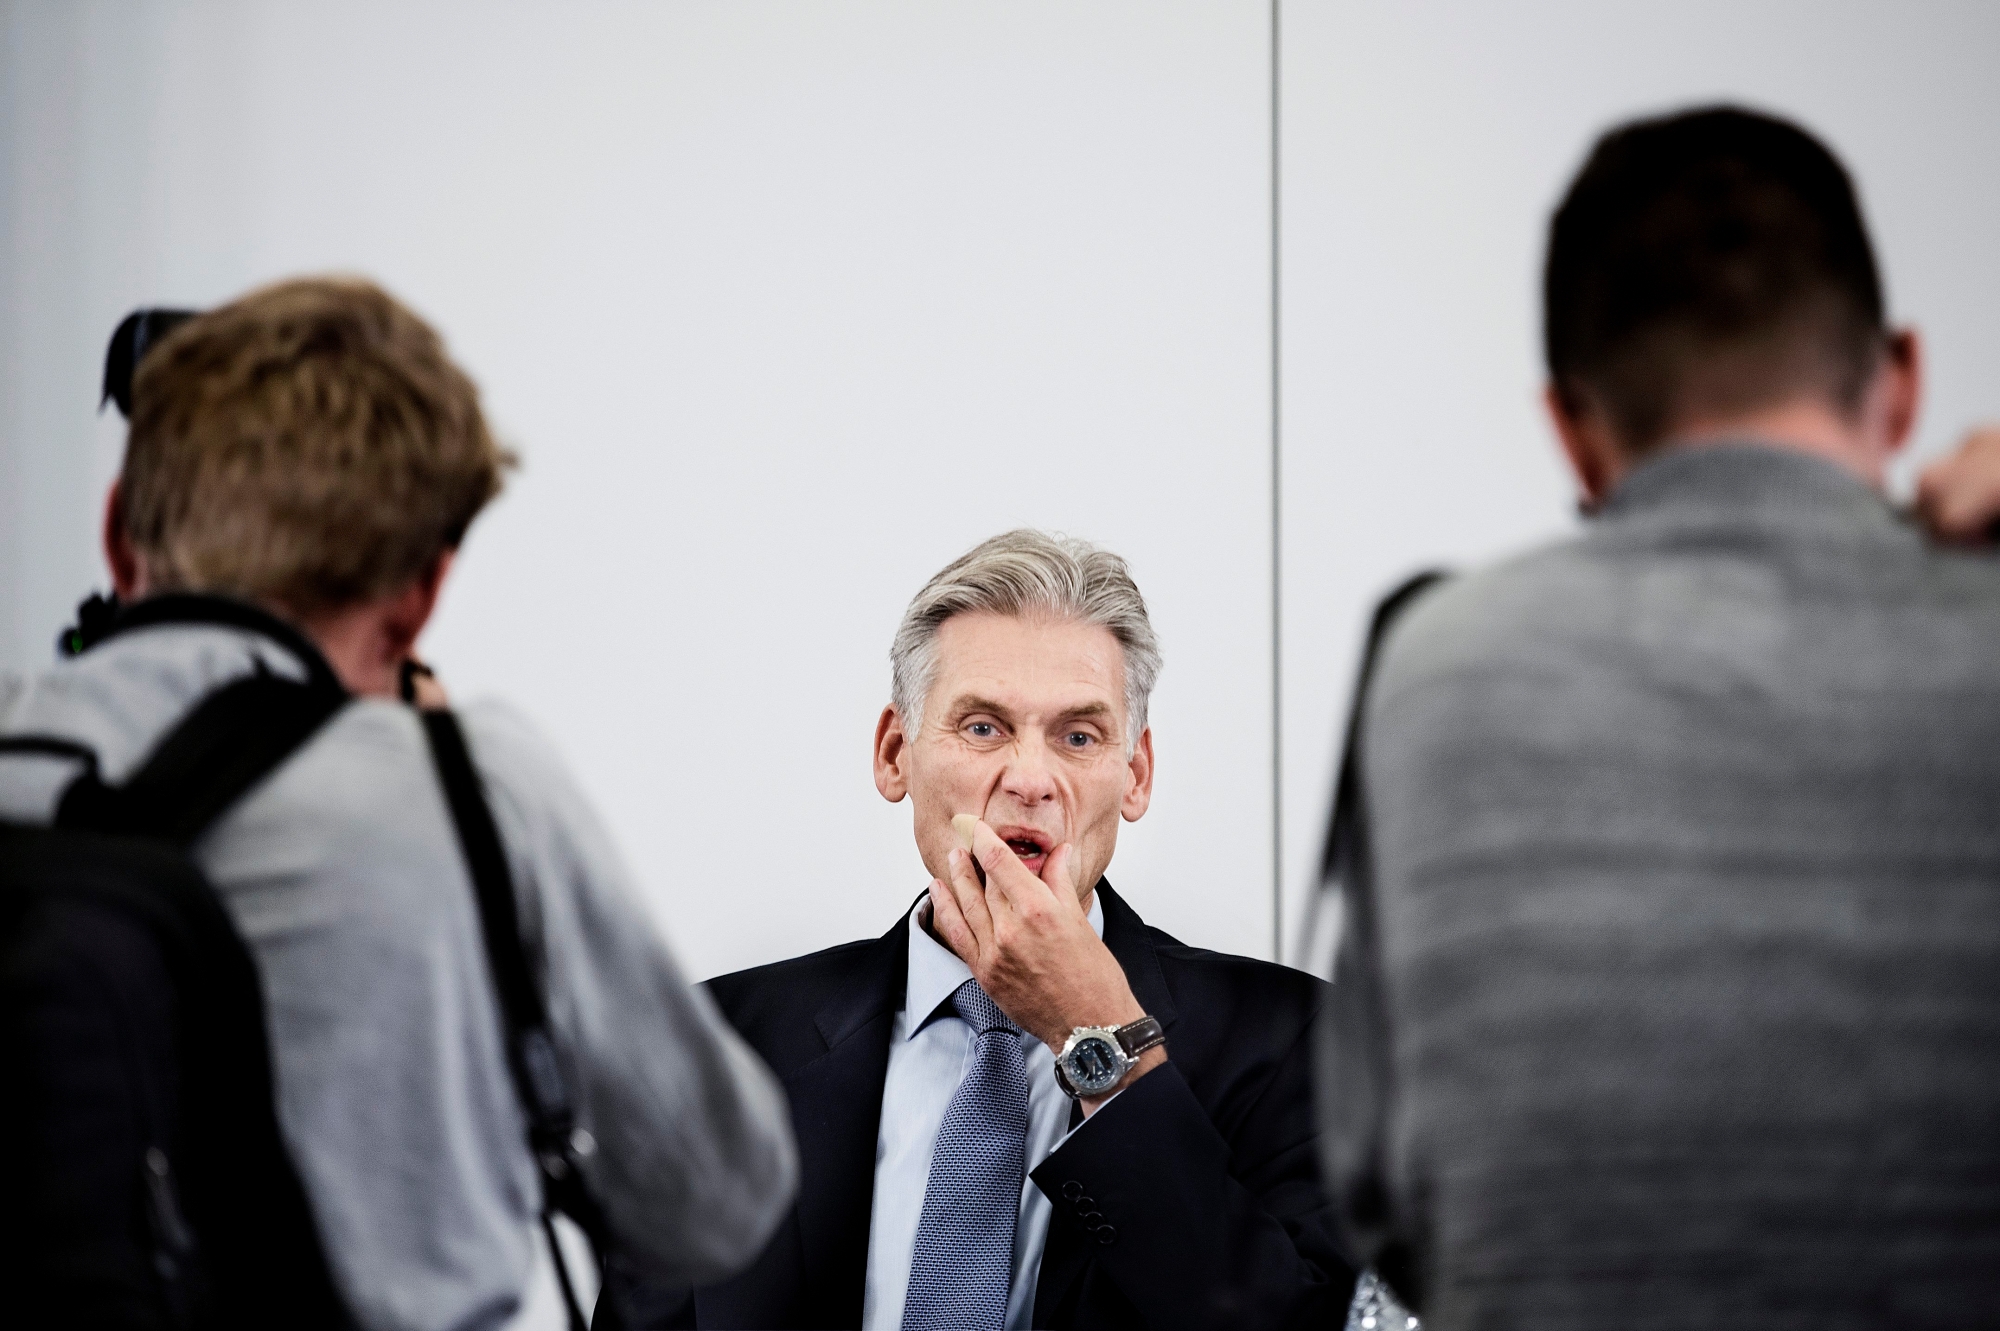 epa07031671 Thomas F. Borgen, who resigned on the day as CEO of Danske Bank, moments before a press conference about the money laundering scandal in the bank, at the Tivoli Congress Center in Copenhagen, Denmark, 19 September 2018. Borgen has resigned on the day as a result of an alleged money laundering via the bank's branch in Estonia, media reported.  EPA/LISELOTTE SABROE  DENMARK OUT DENMARK DANSKE BANK